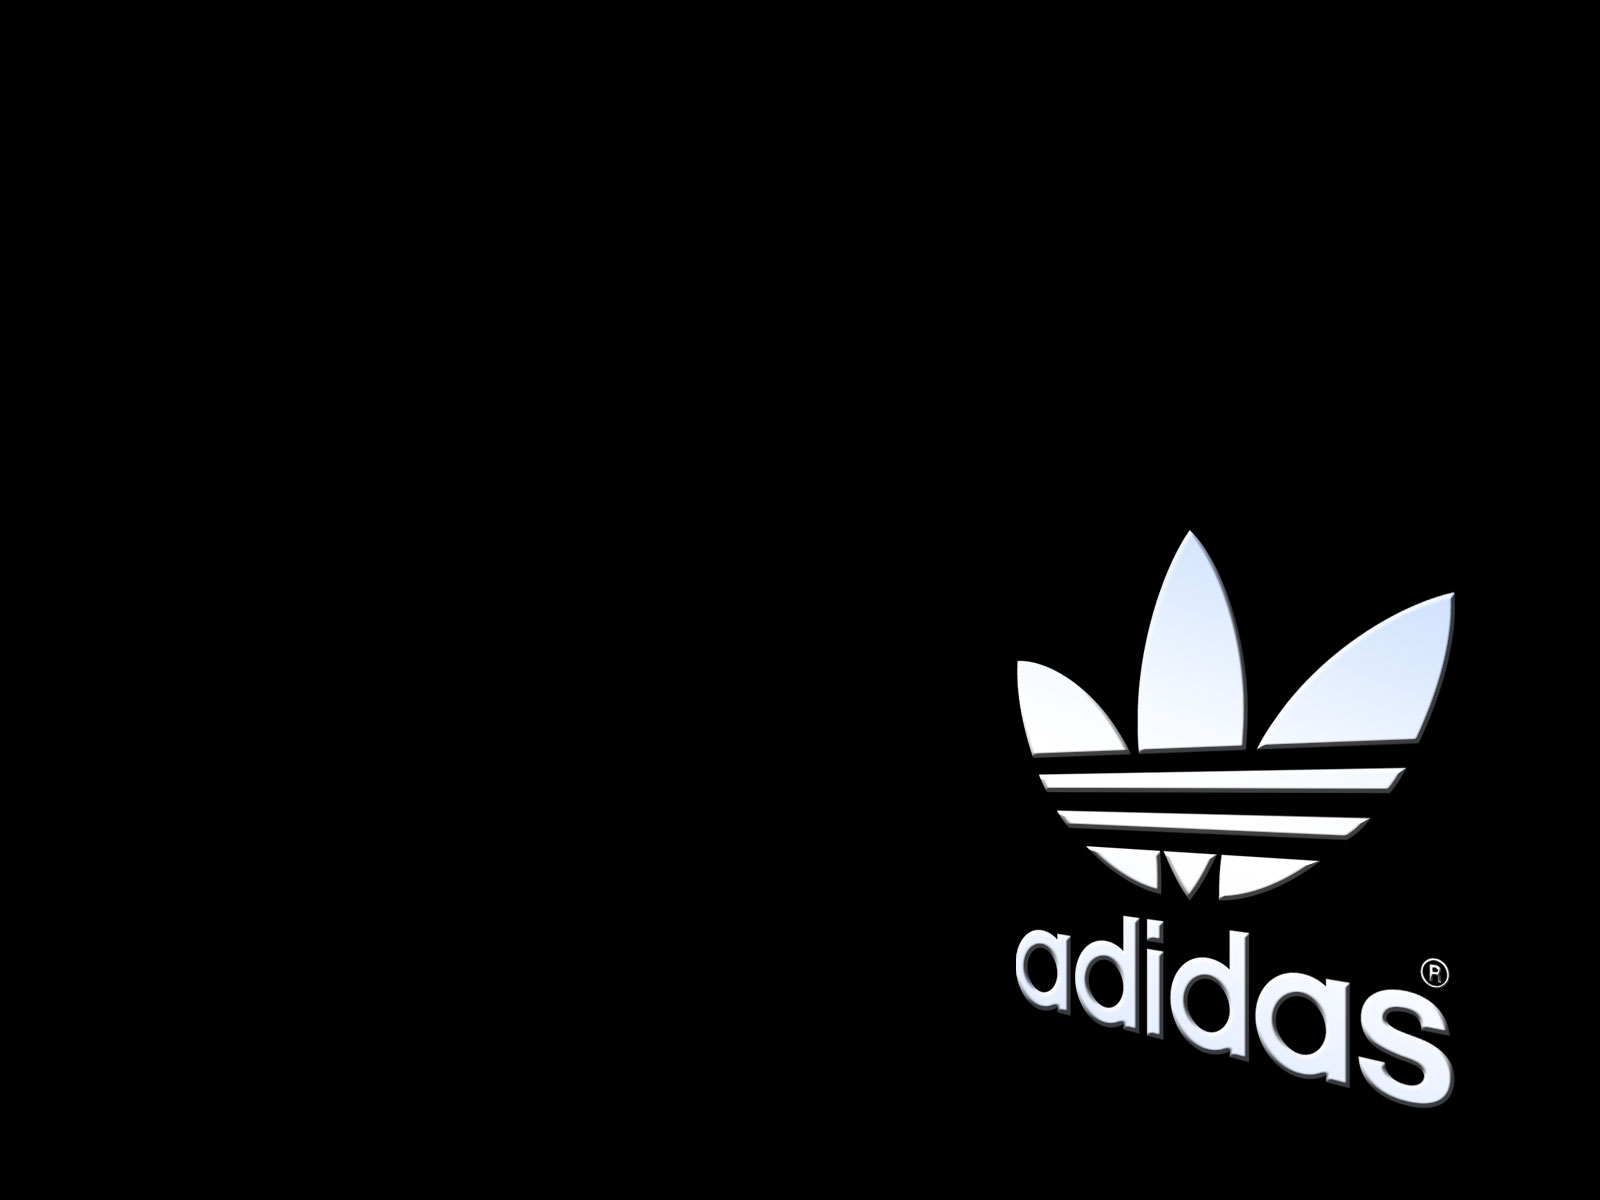 Adidas Logo Wallpaper And Image Pictures